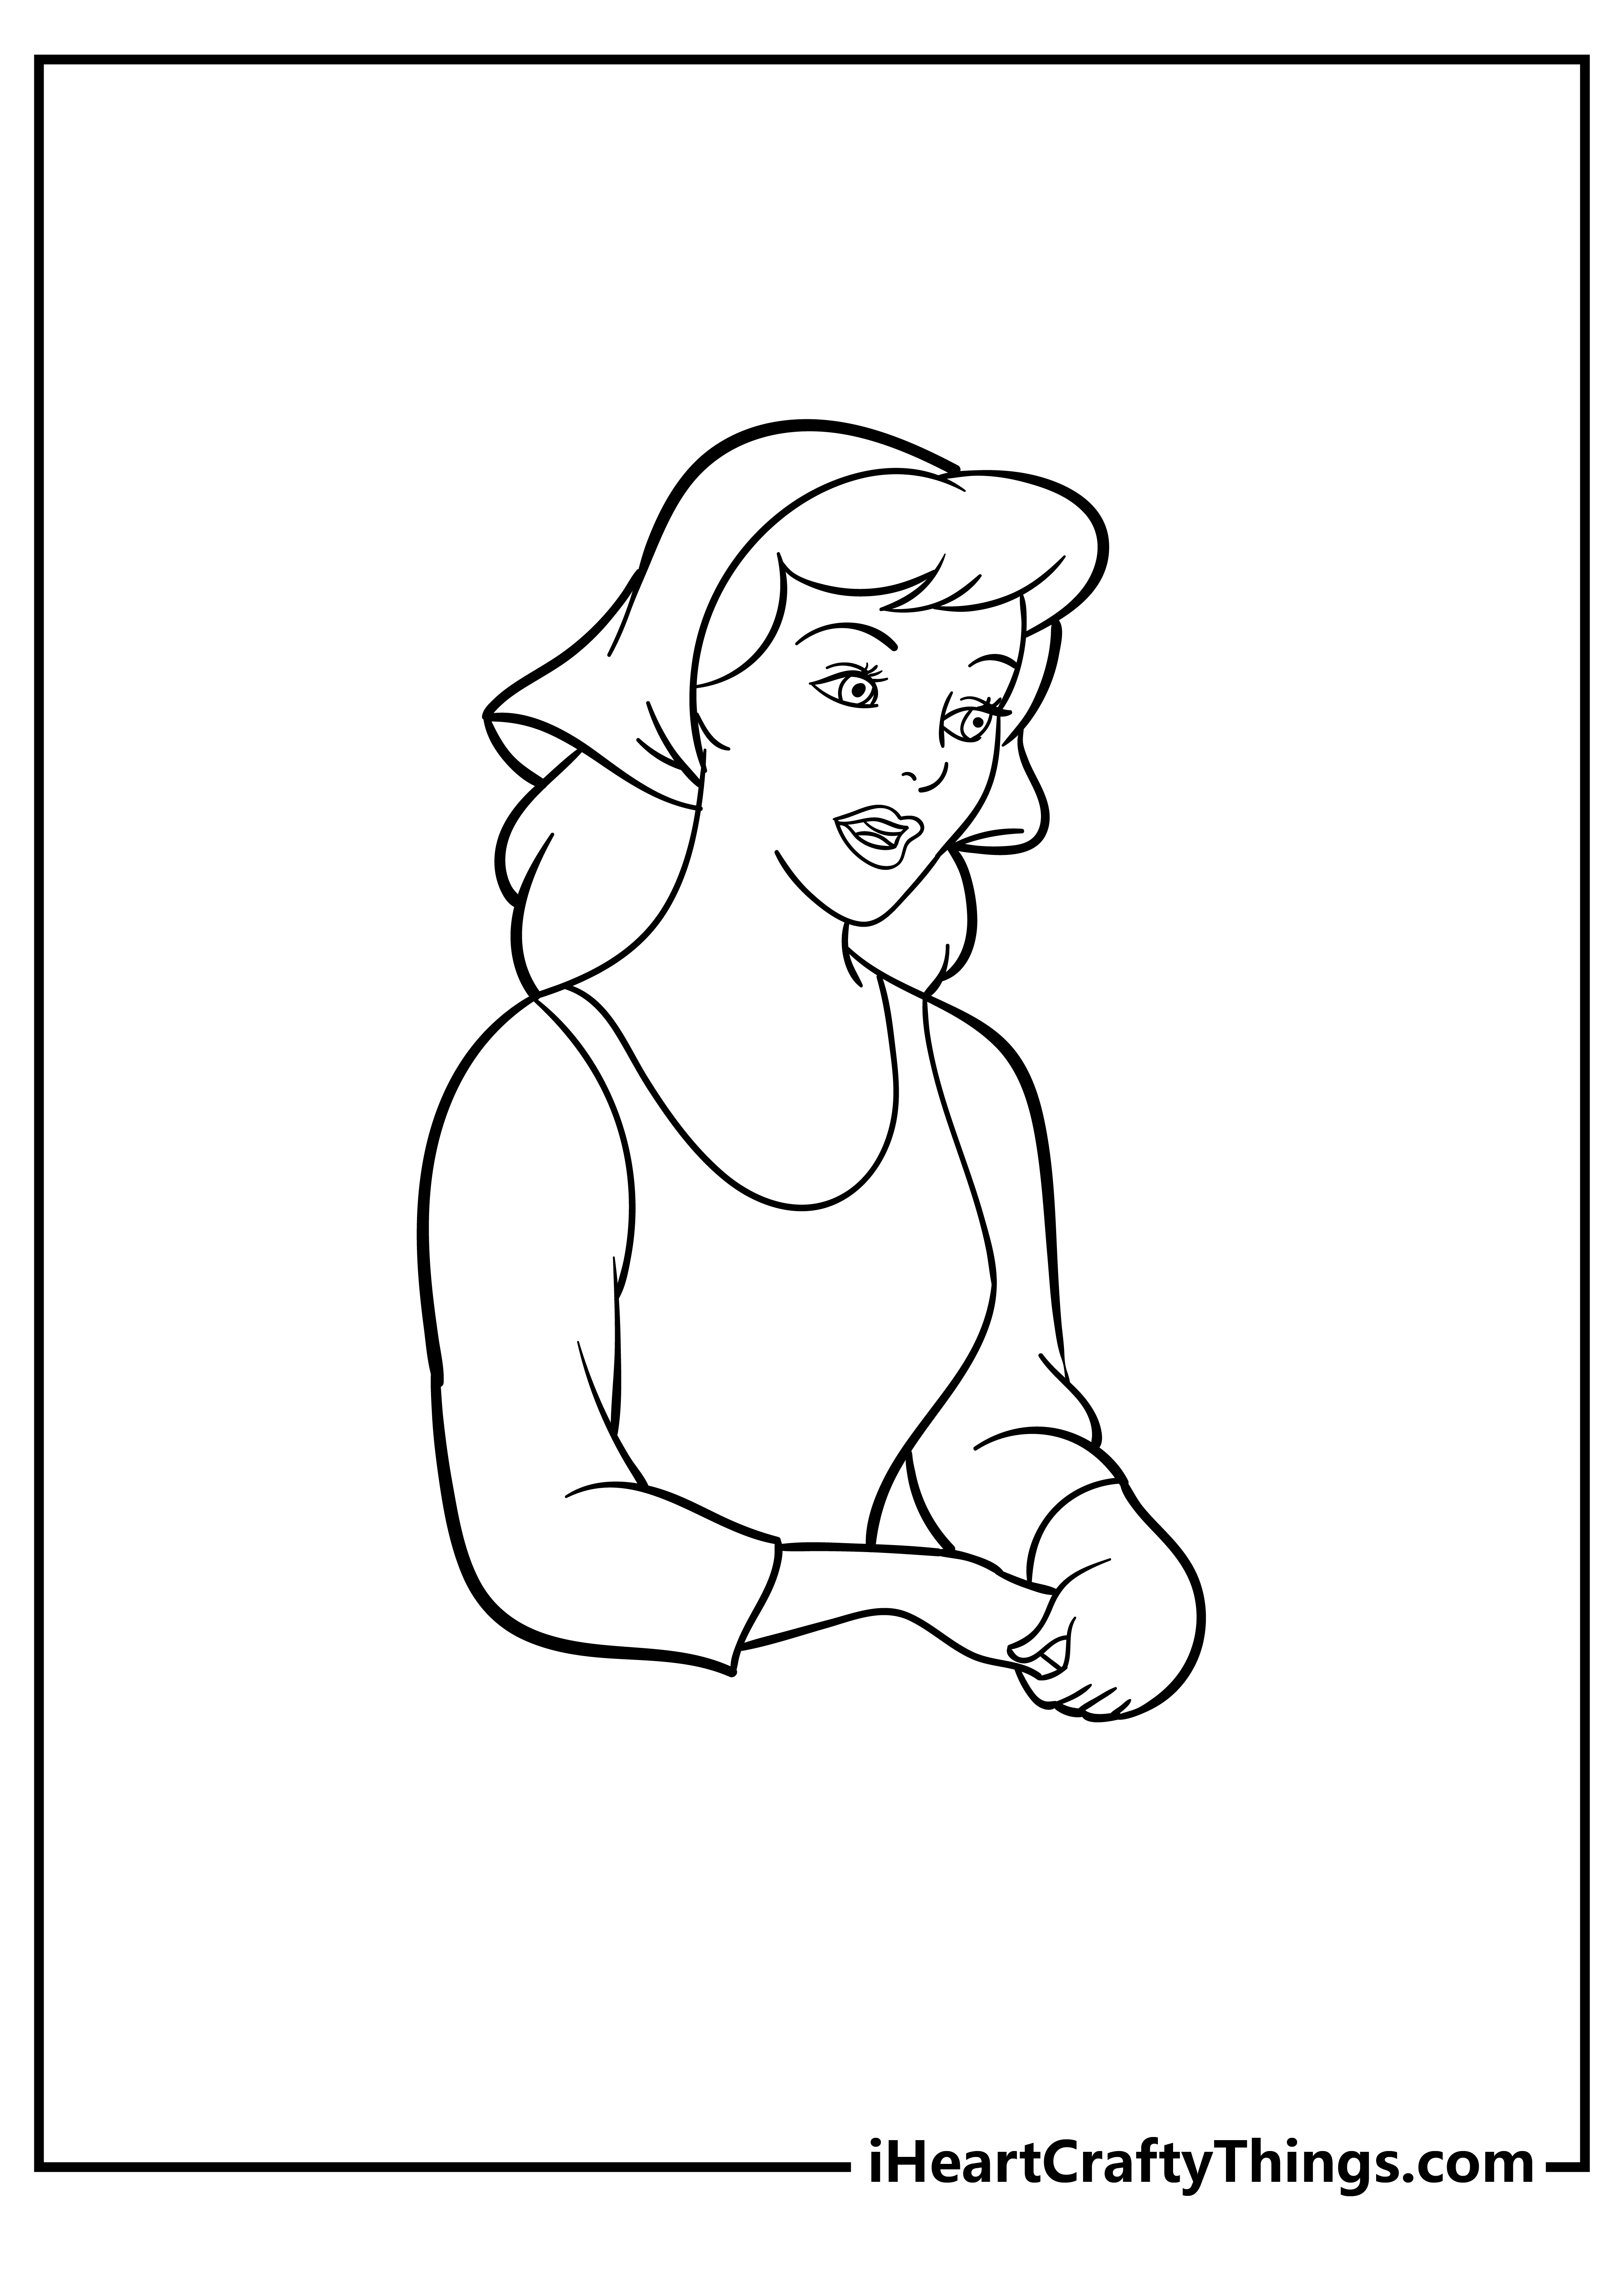 Cinderella Coloring Book for adults free download